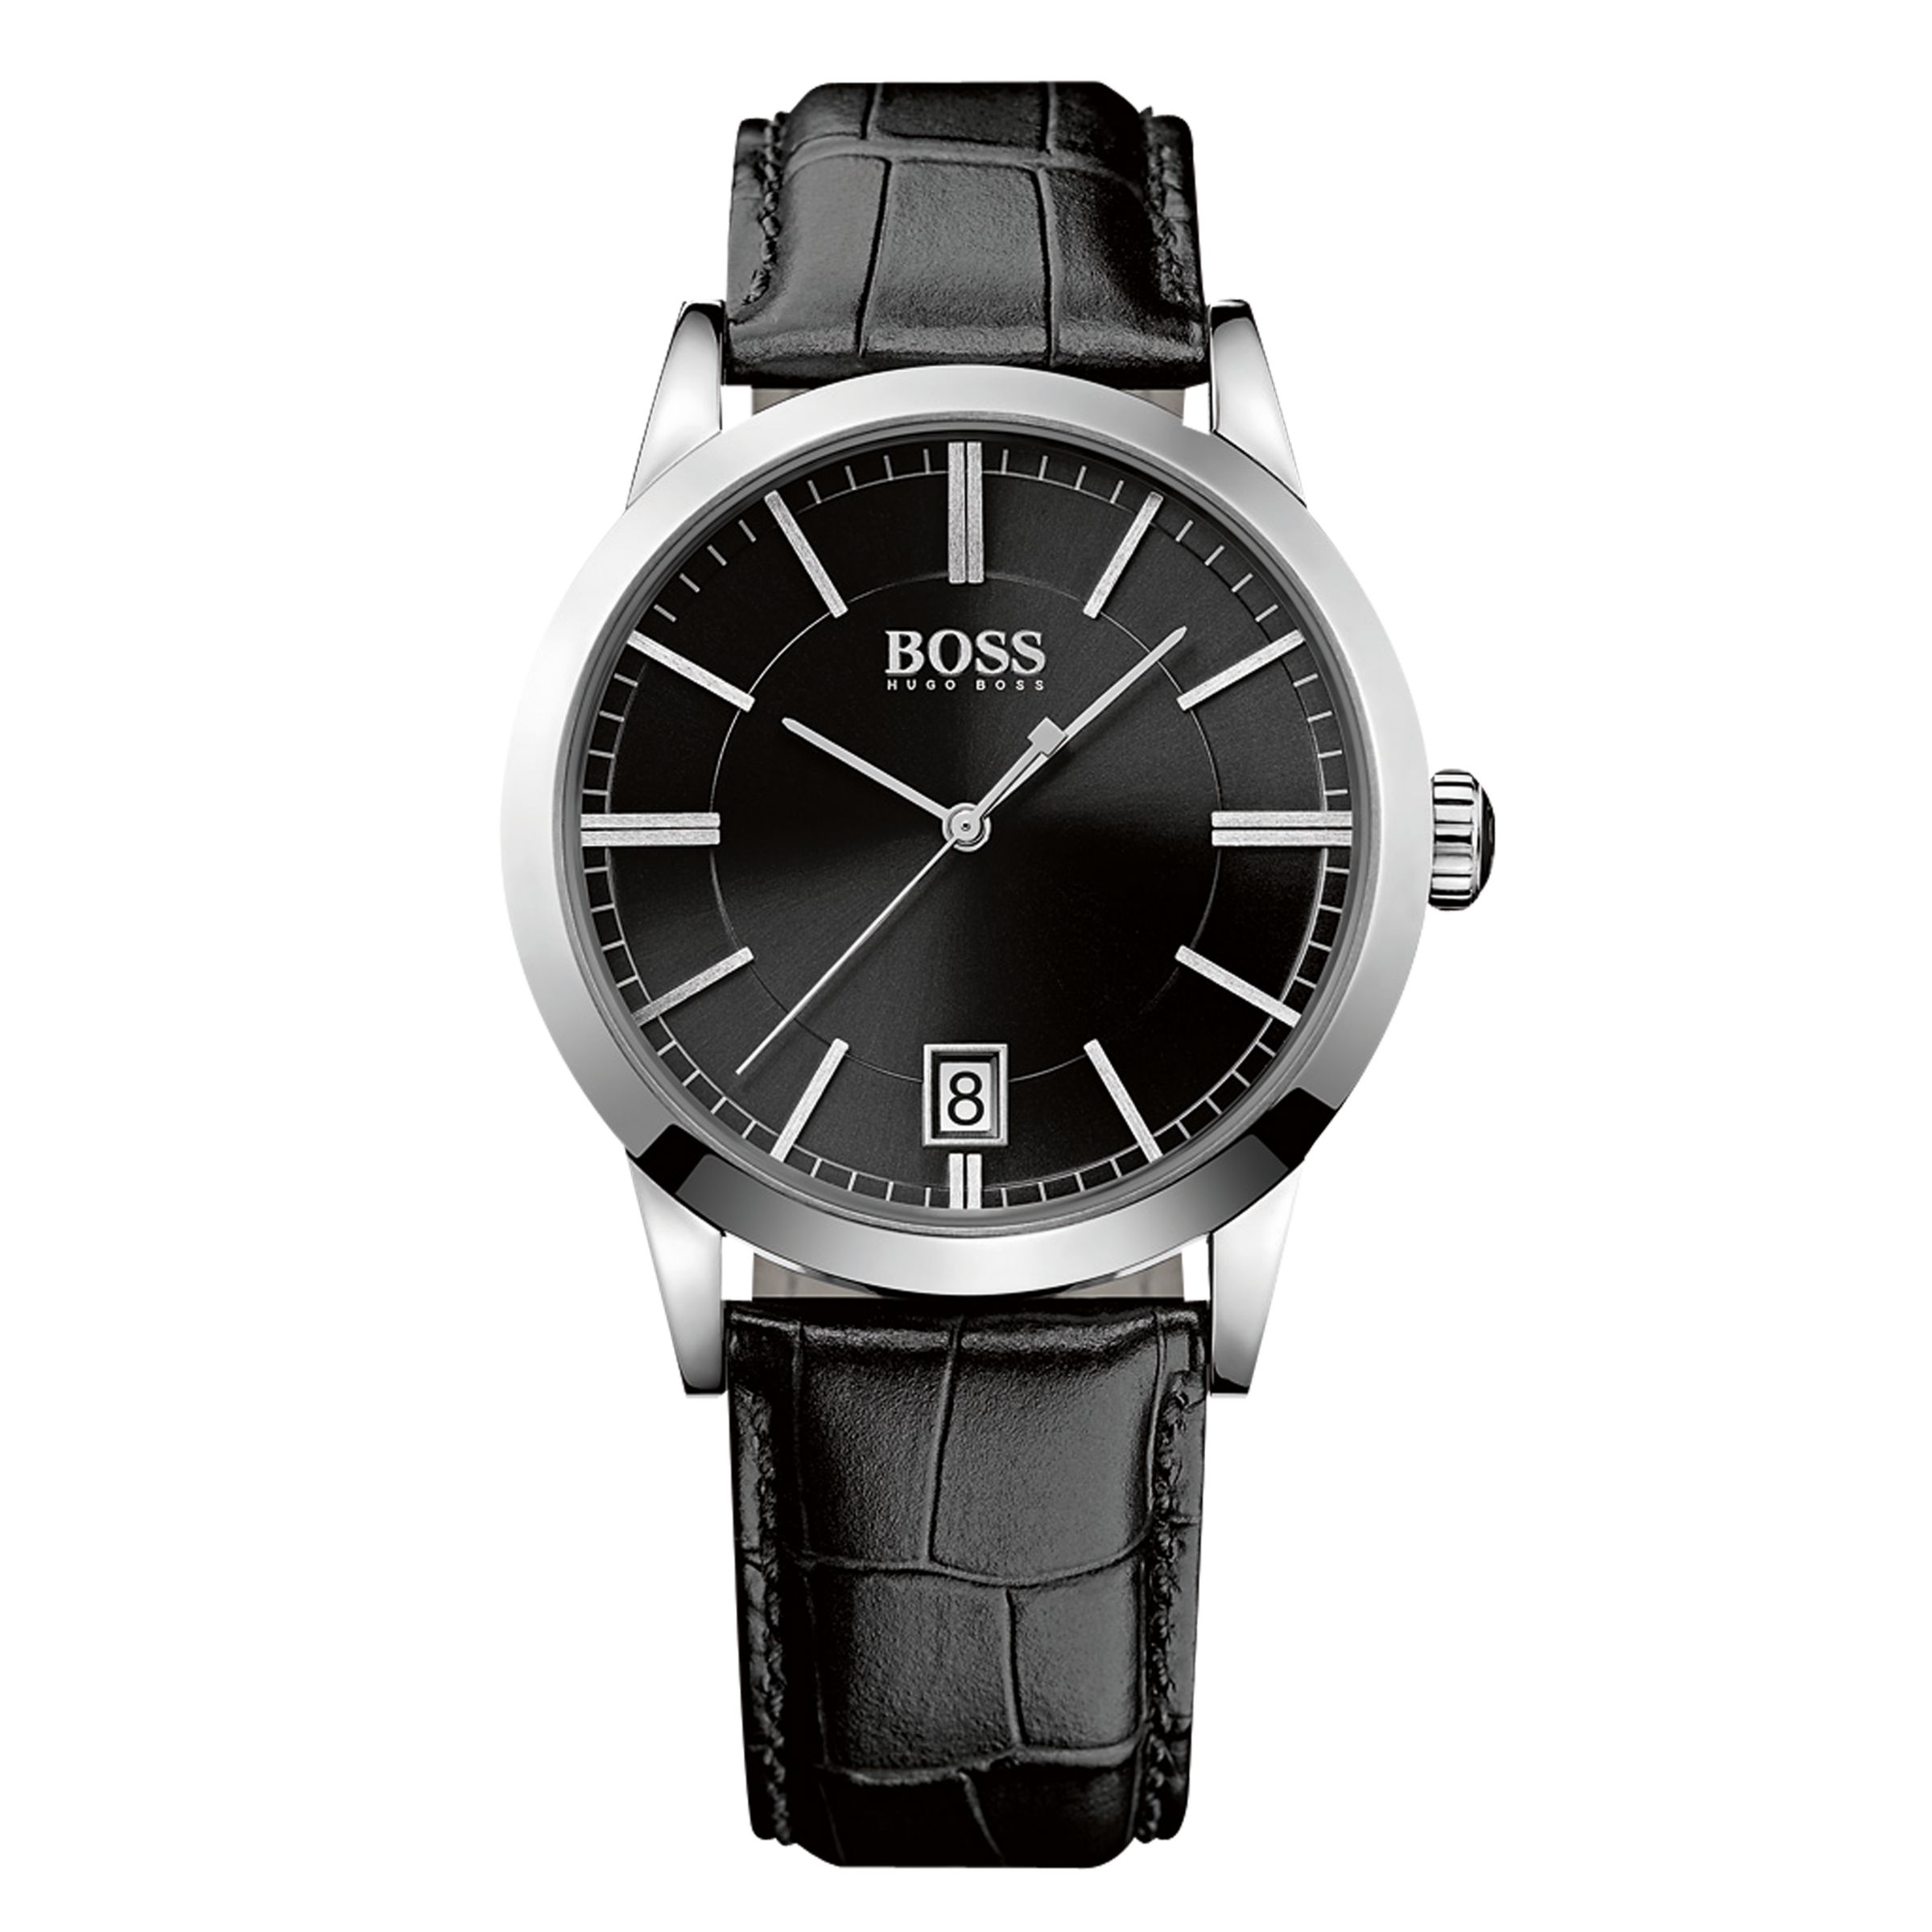 how to change the date on hugo boss watch